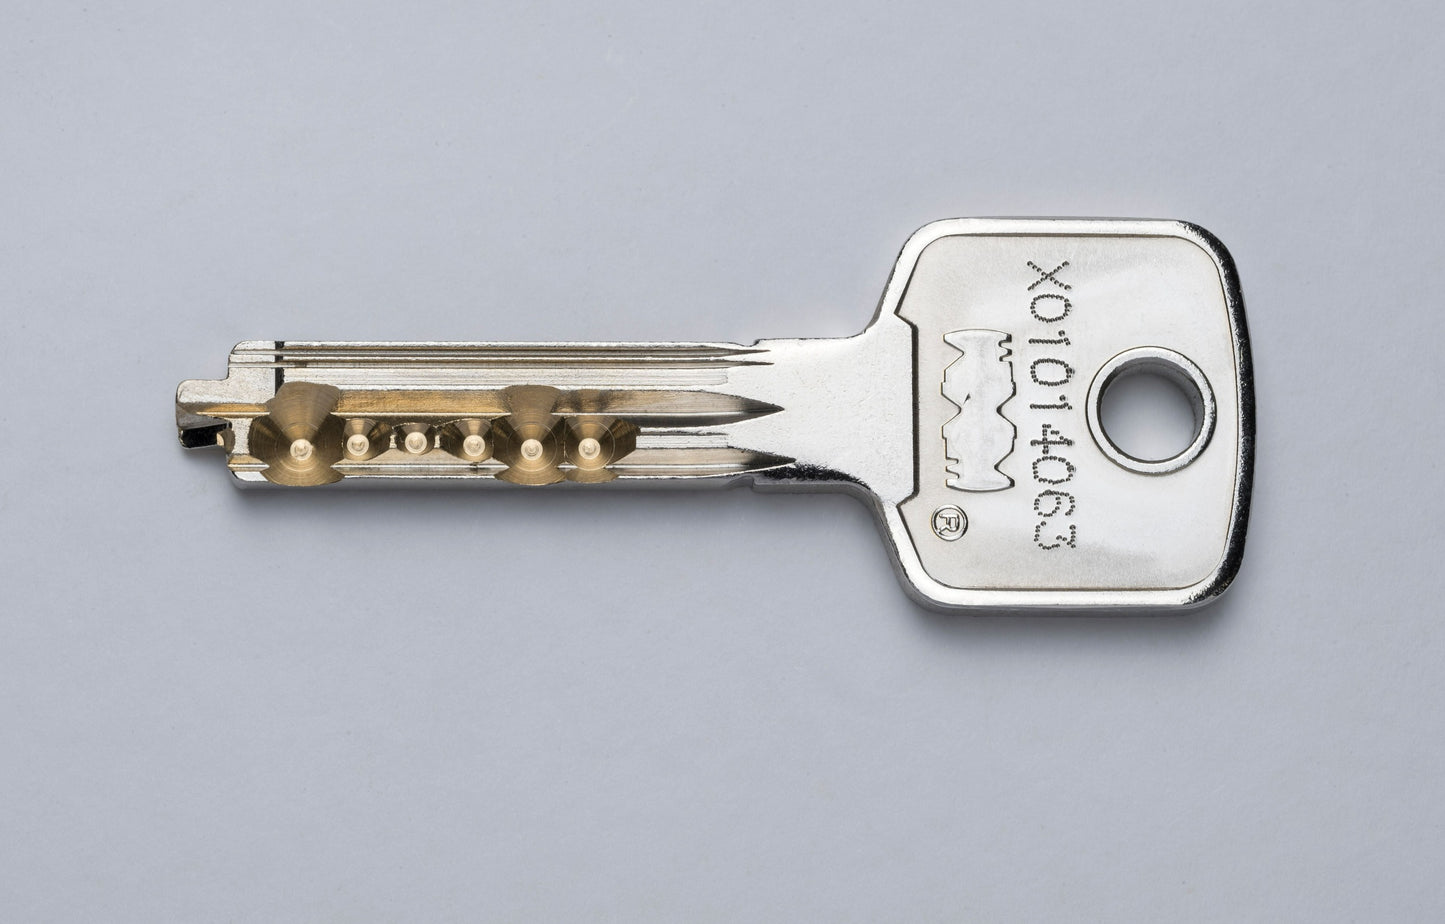 Ultion WXM Key Cut To Code Keycodes starting with X.......